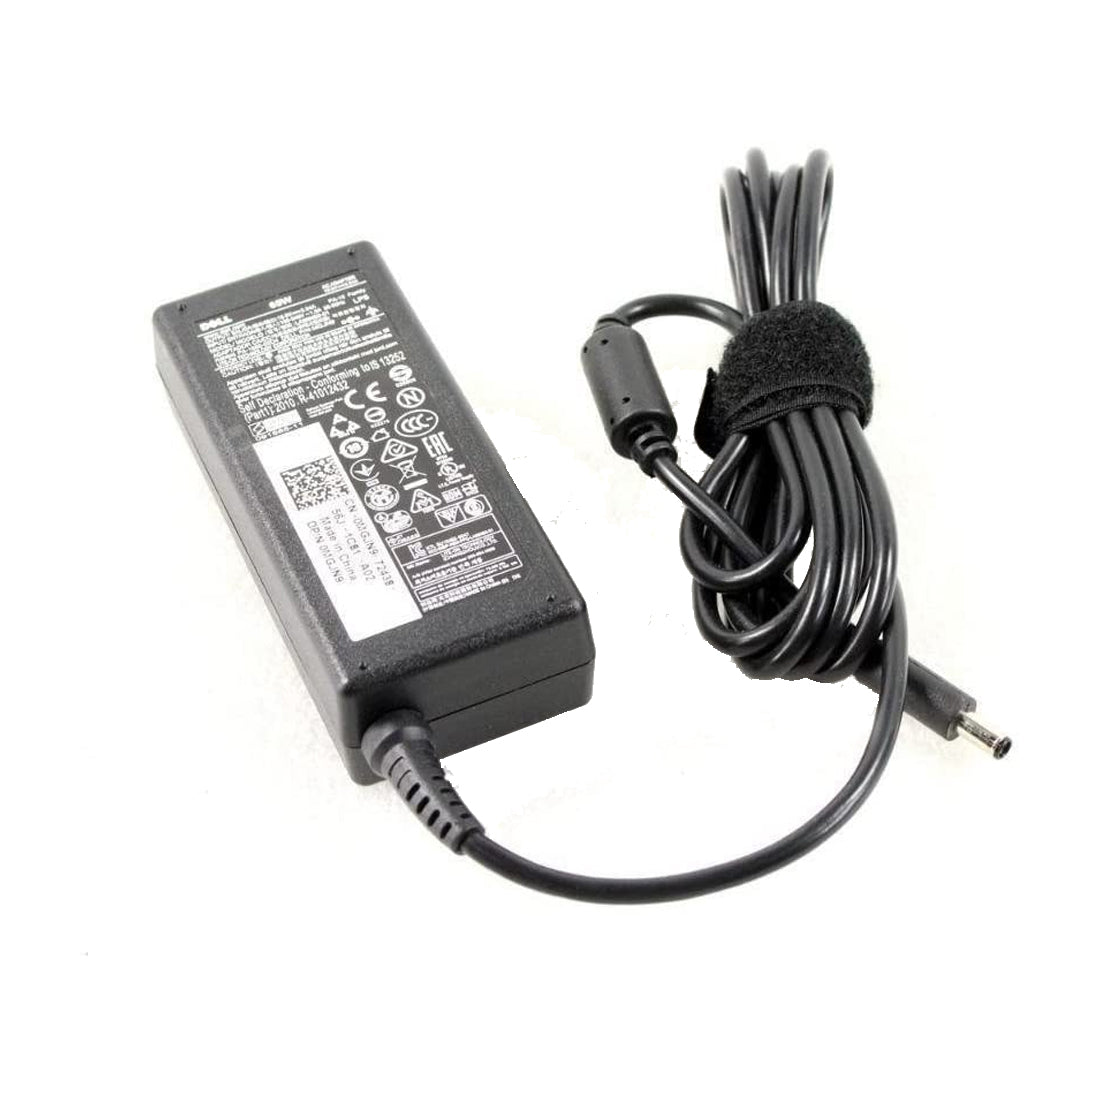 Dell Original 65W 19.5V 4.5mm Pin Laptop Charger Adapter for Vostro 14 3458 With Power Cord